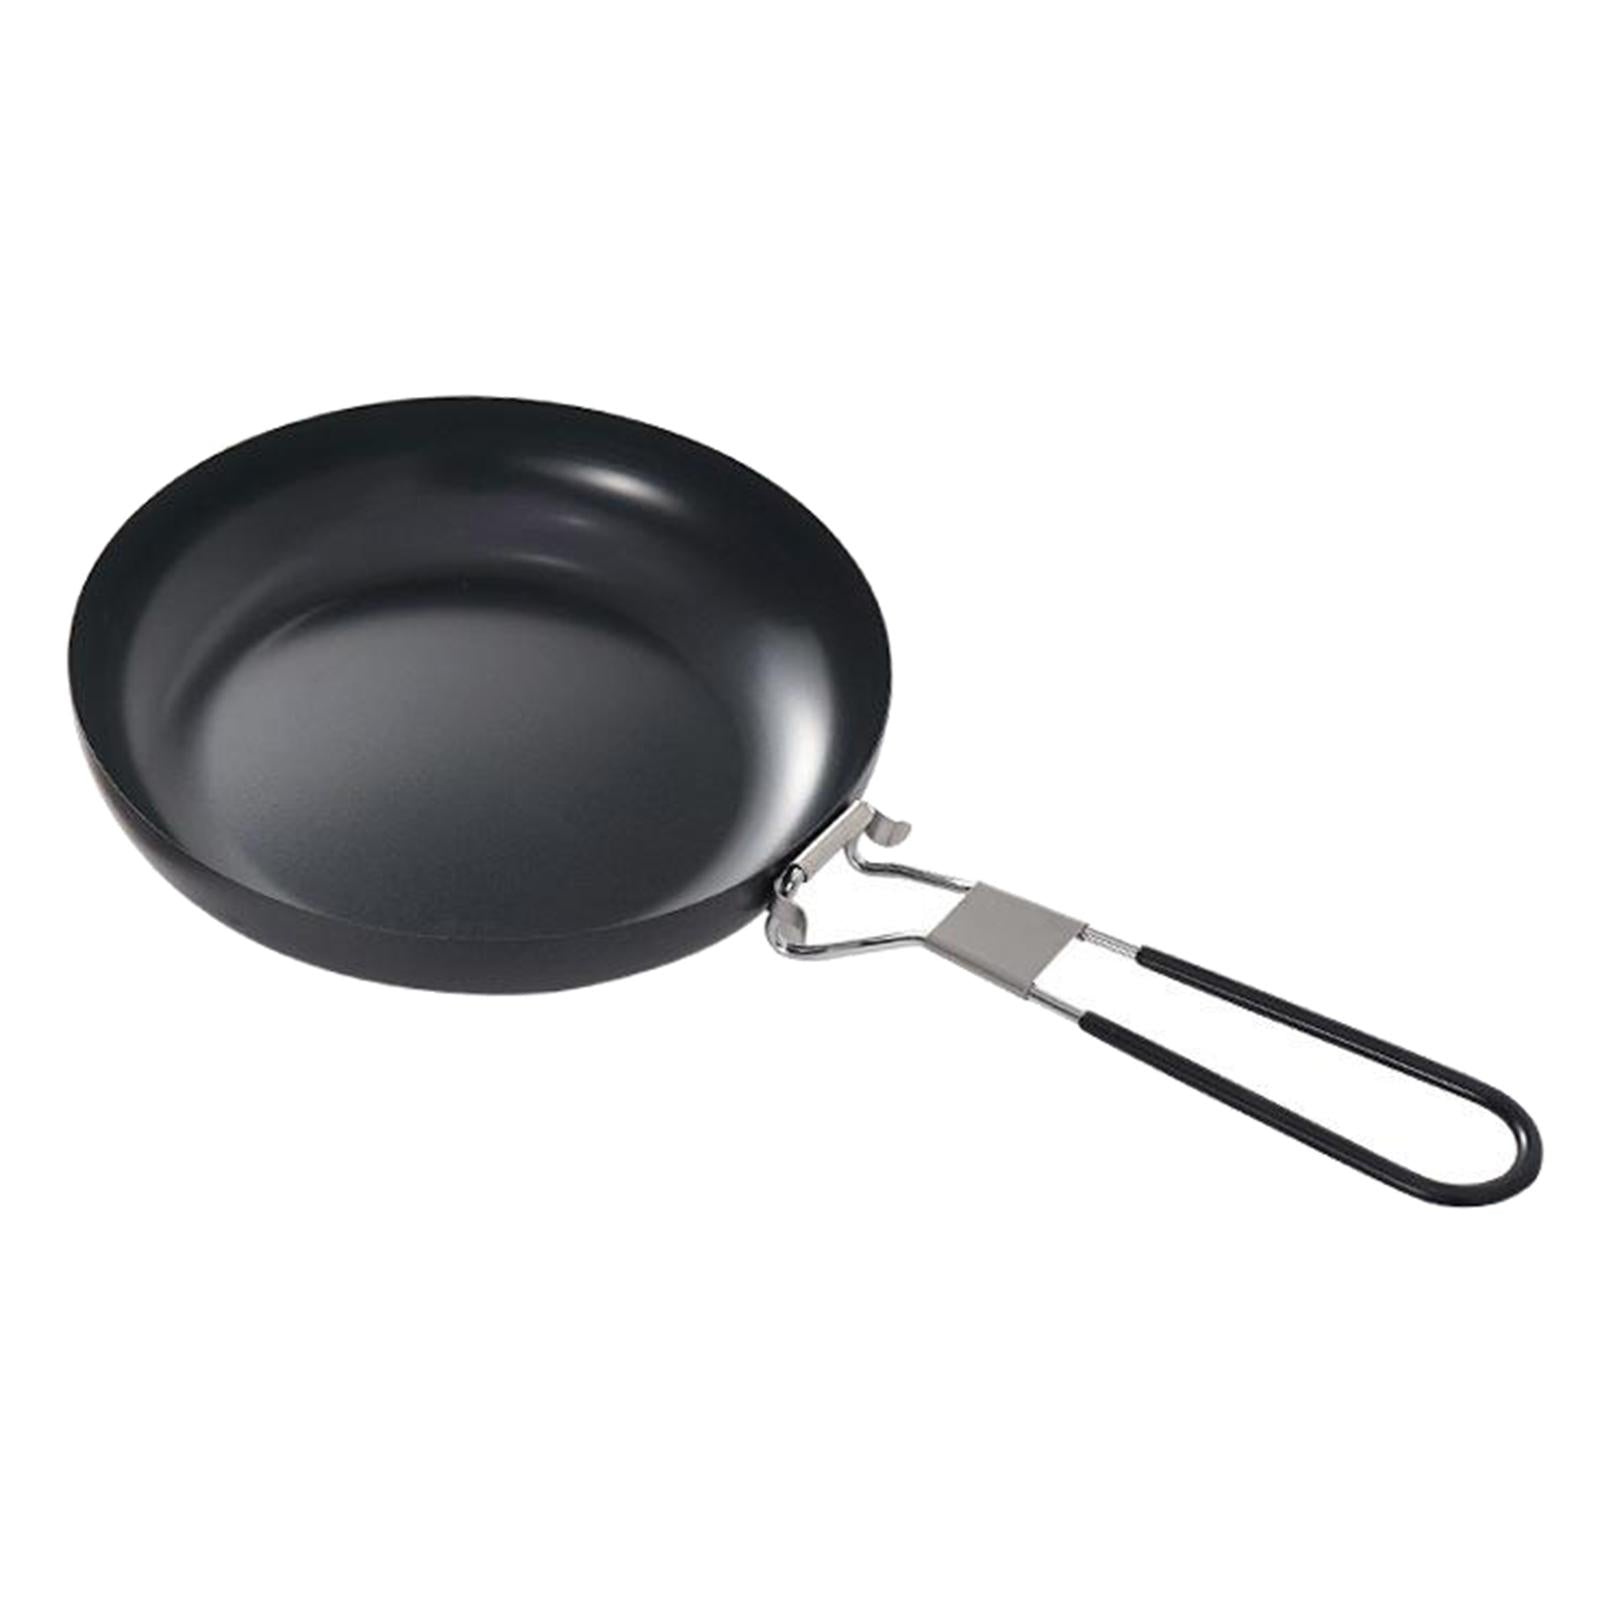 Non Stick Camping Cookware Skillet Frying Pan, for Outdoor Hiking Picnic Camping Backpacking - 9''